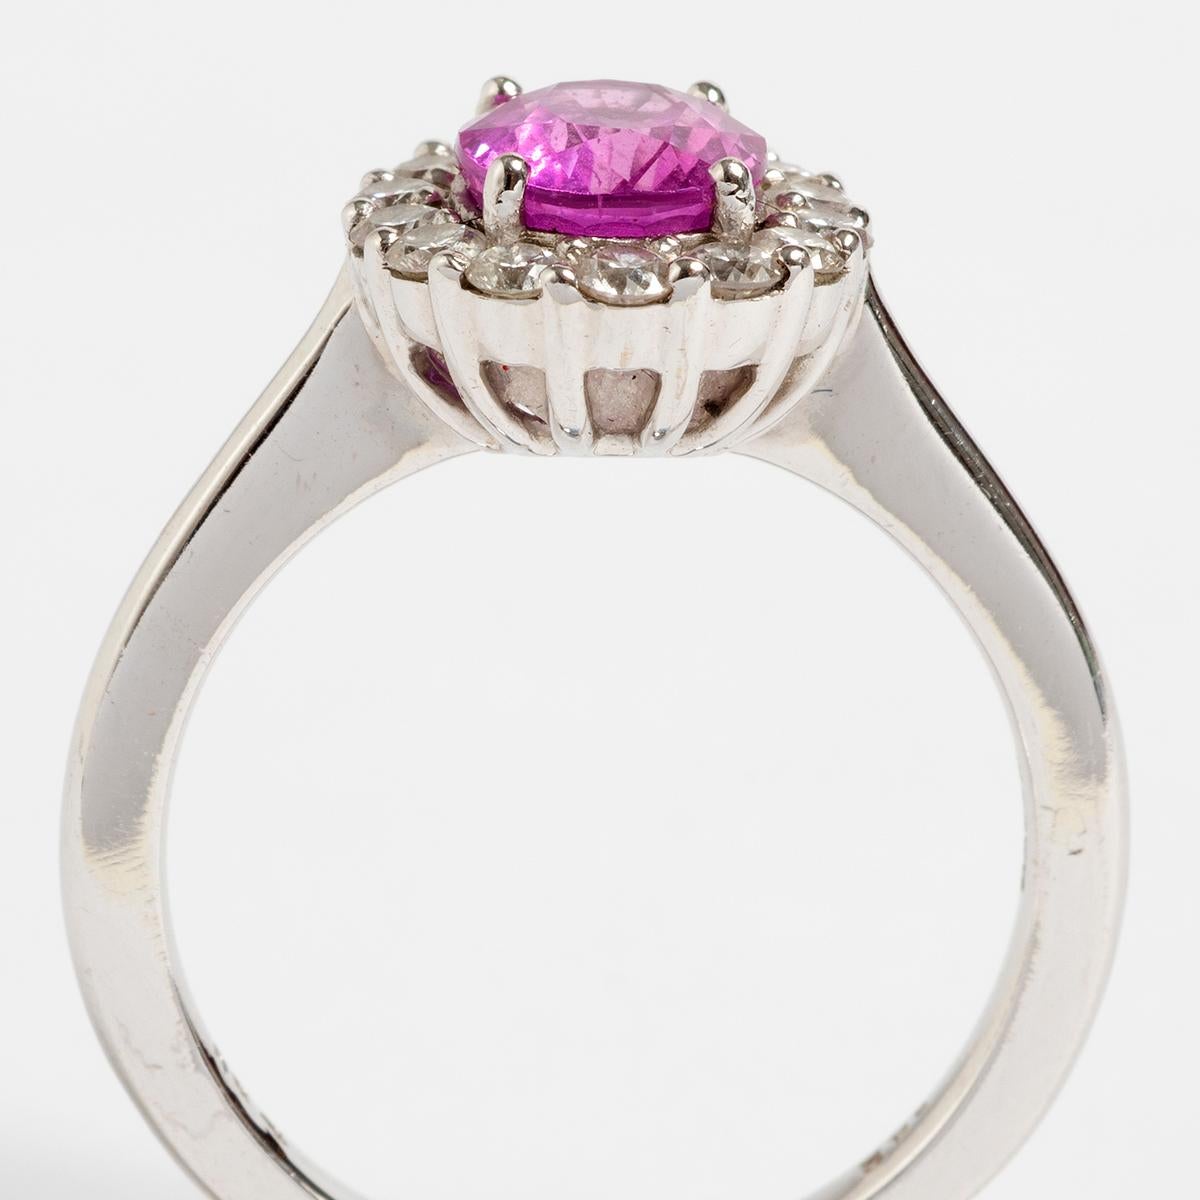 Mixed Cut Pink Sapphire Cluster Ring